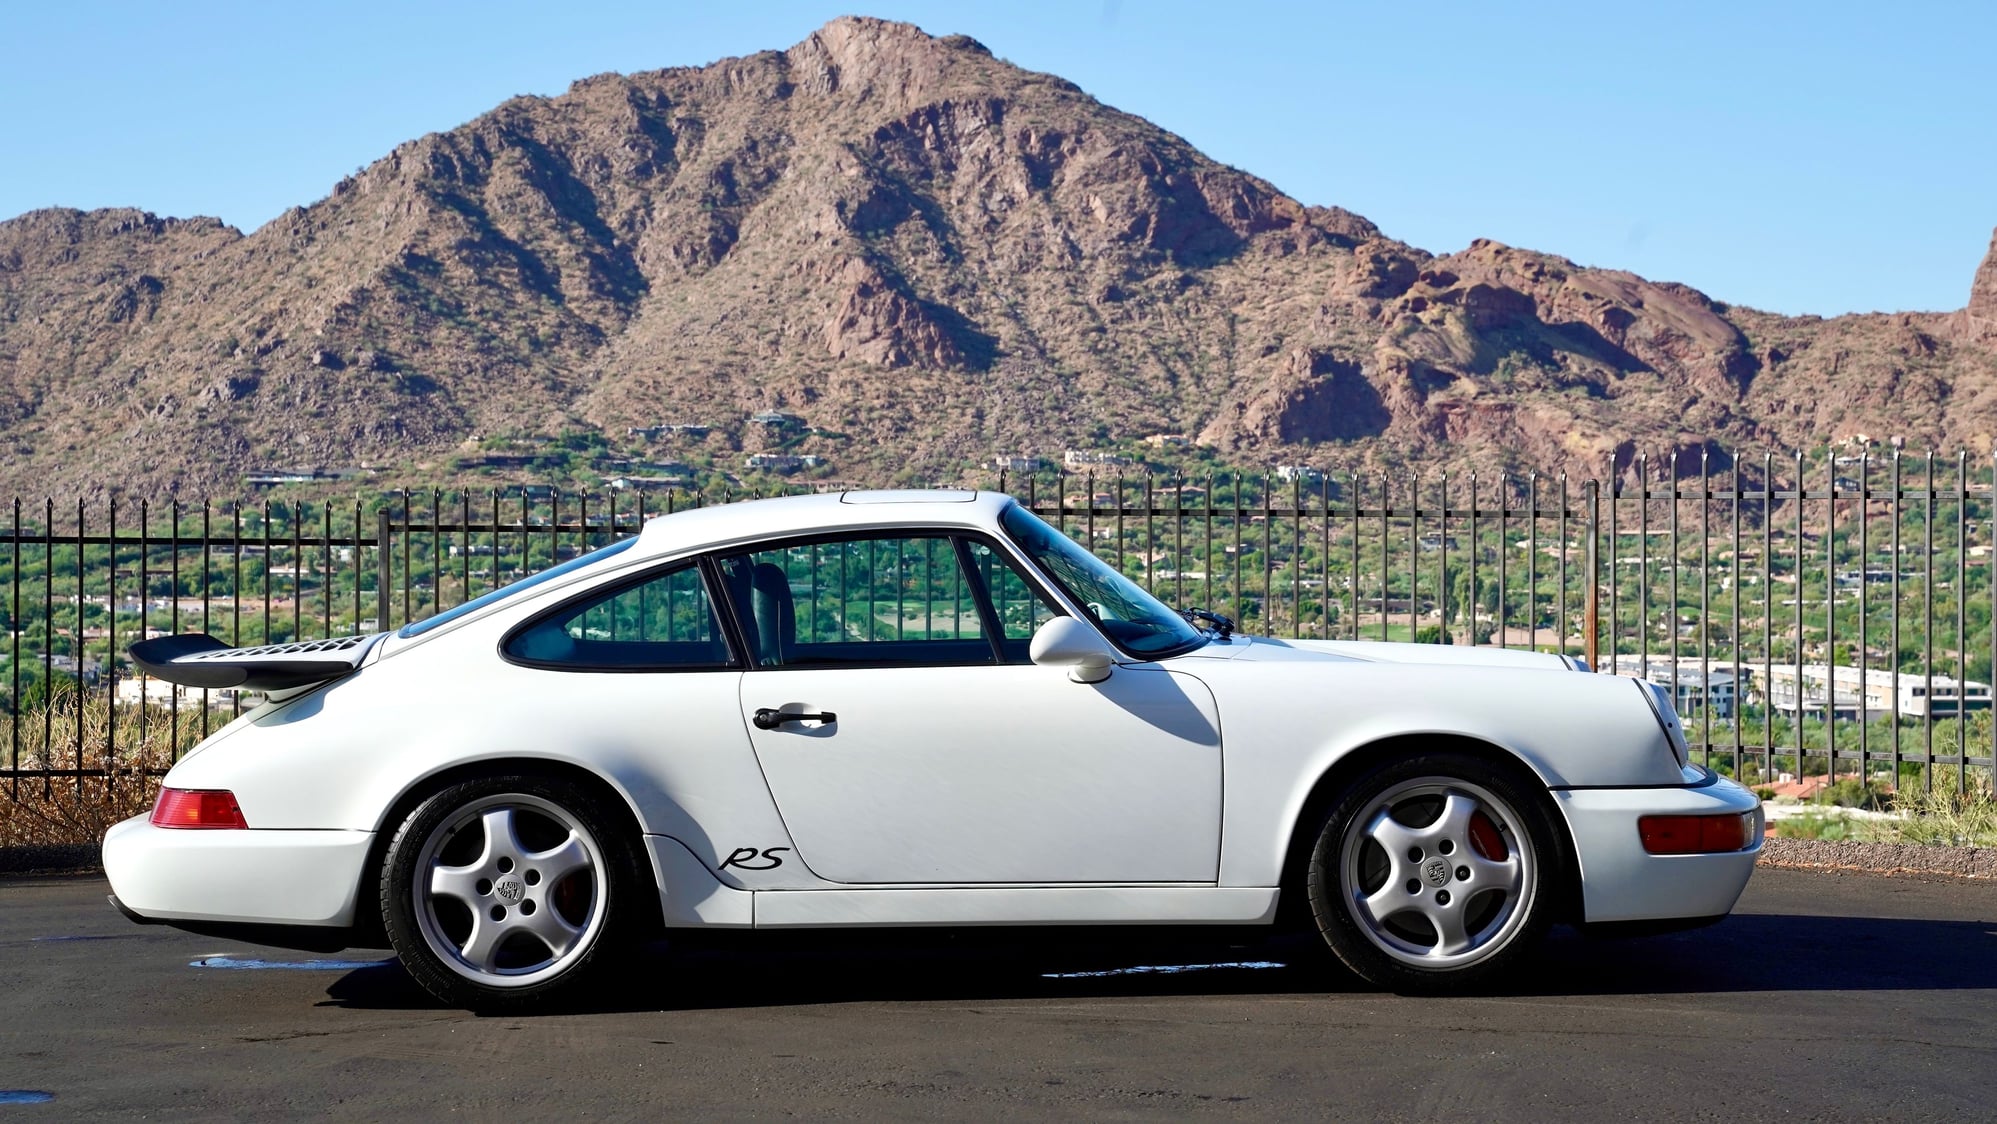 1993 Porsche 911 - 1993 RS America - Used - VIN WP0AB2969PS419321 - 94,600 Miles - 6 cyl - 2WD - Manual - Coupe - White - Phoenix, AZ 85013, United States